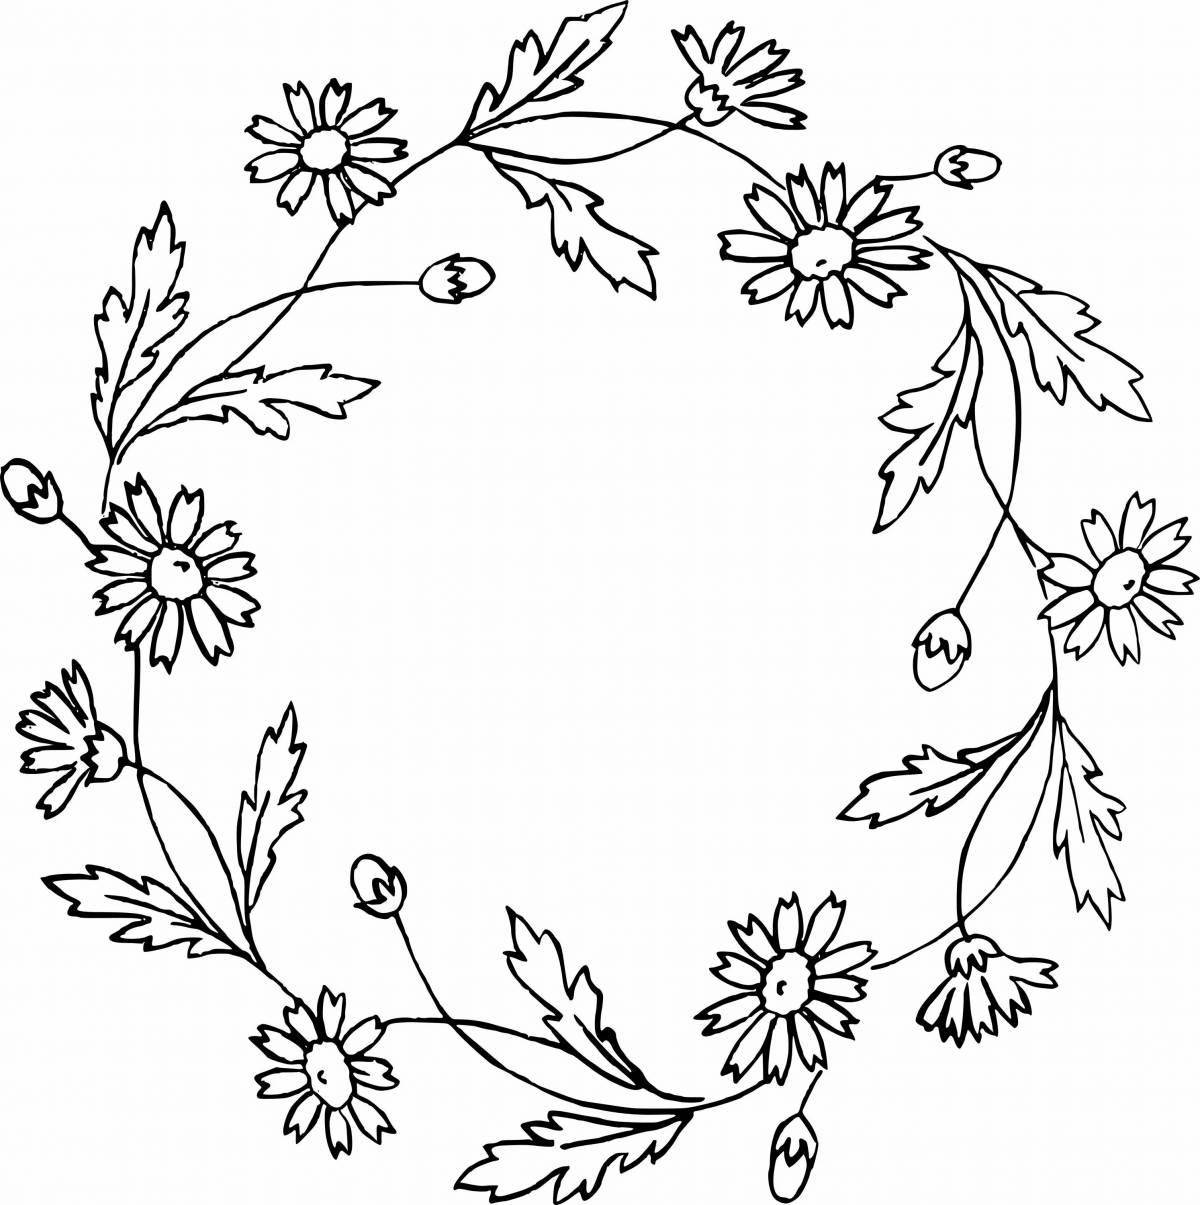 Coloring page dazzling wreath of flowers